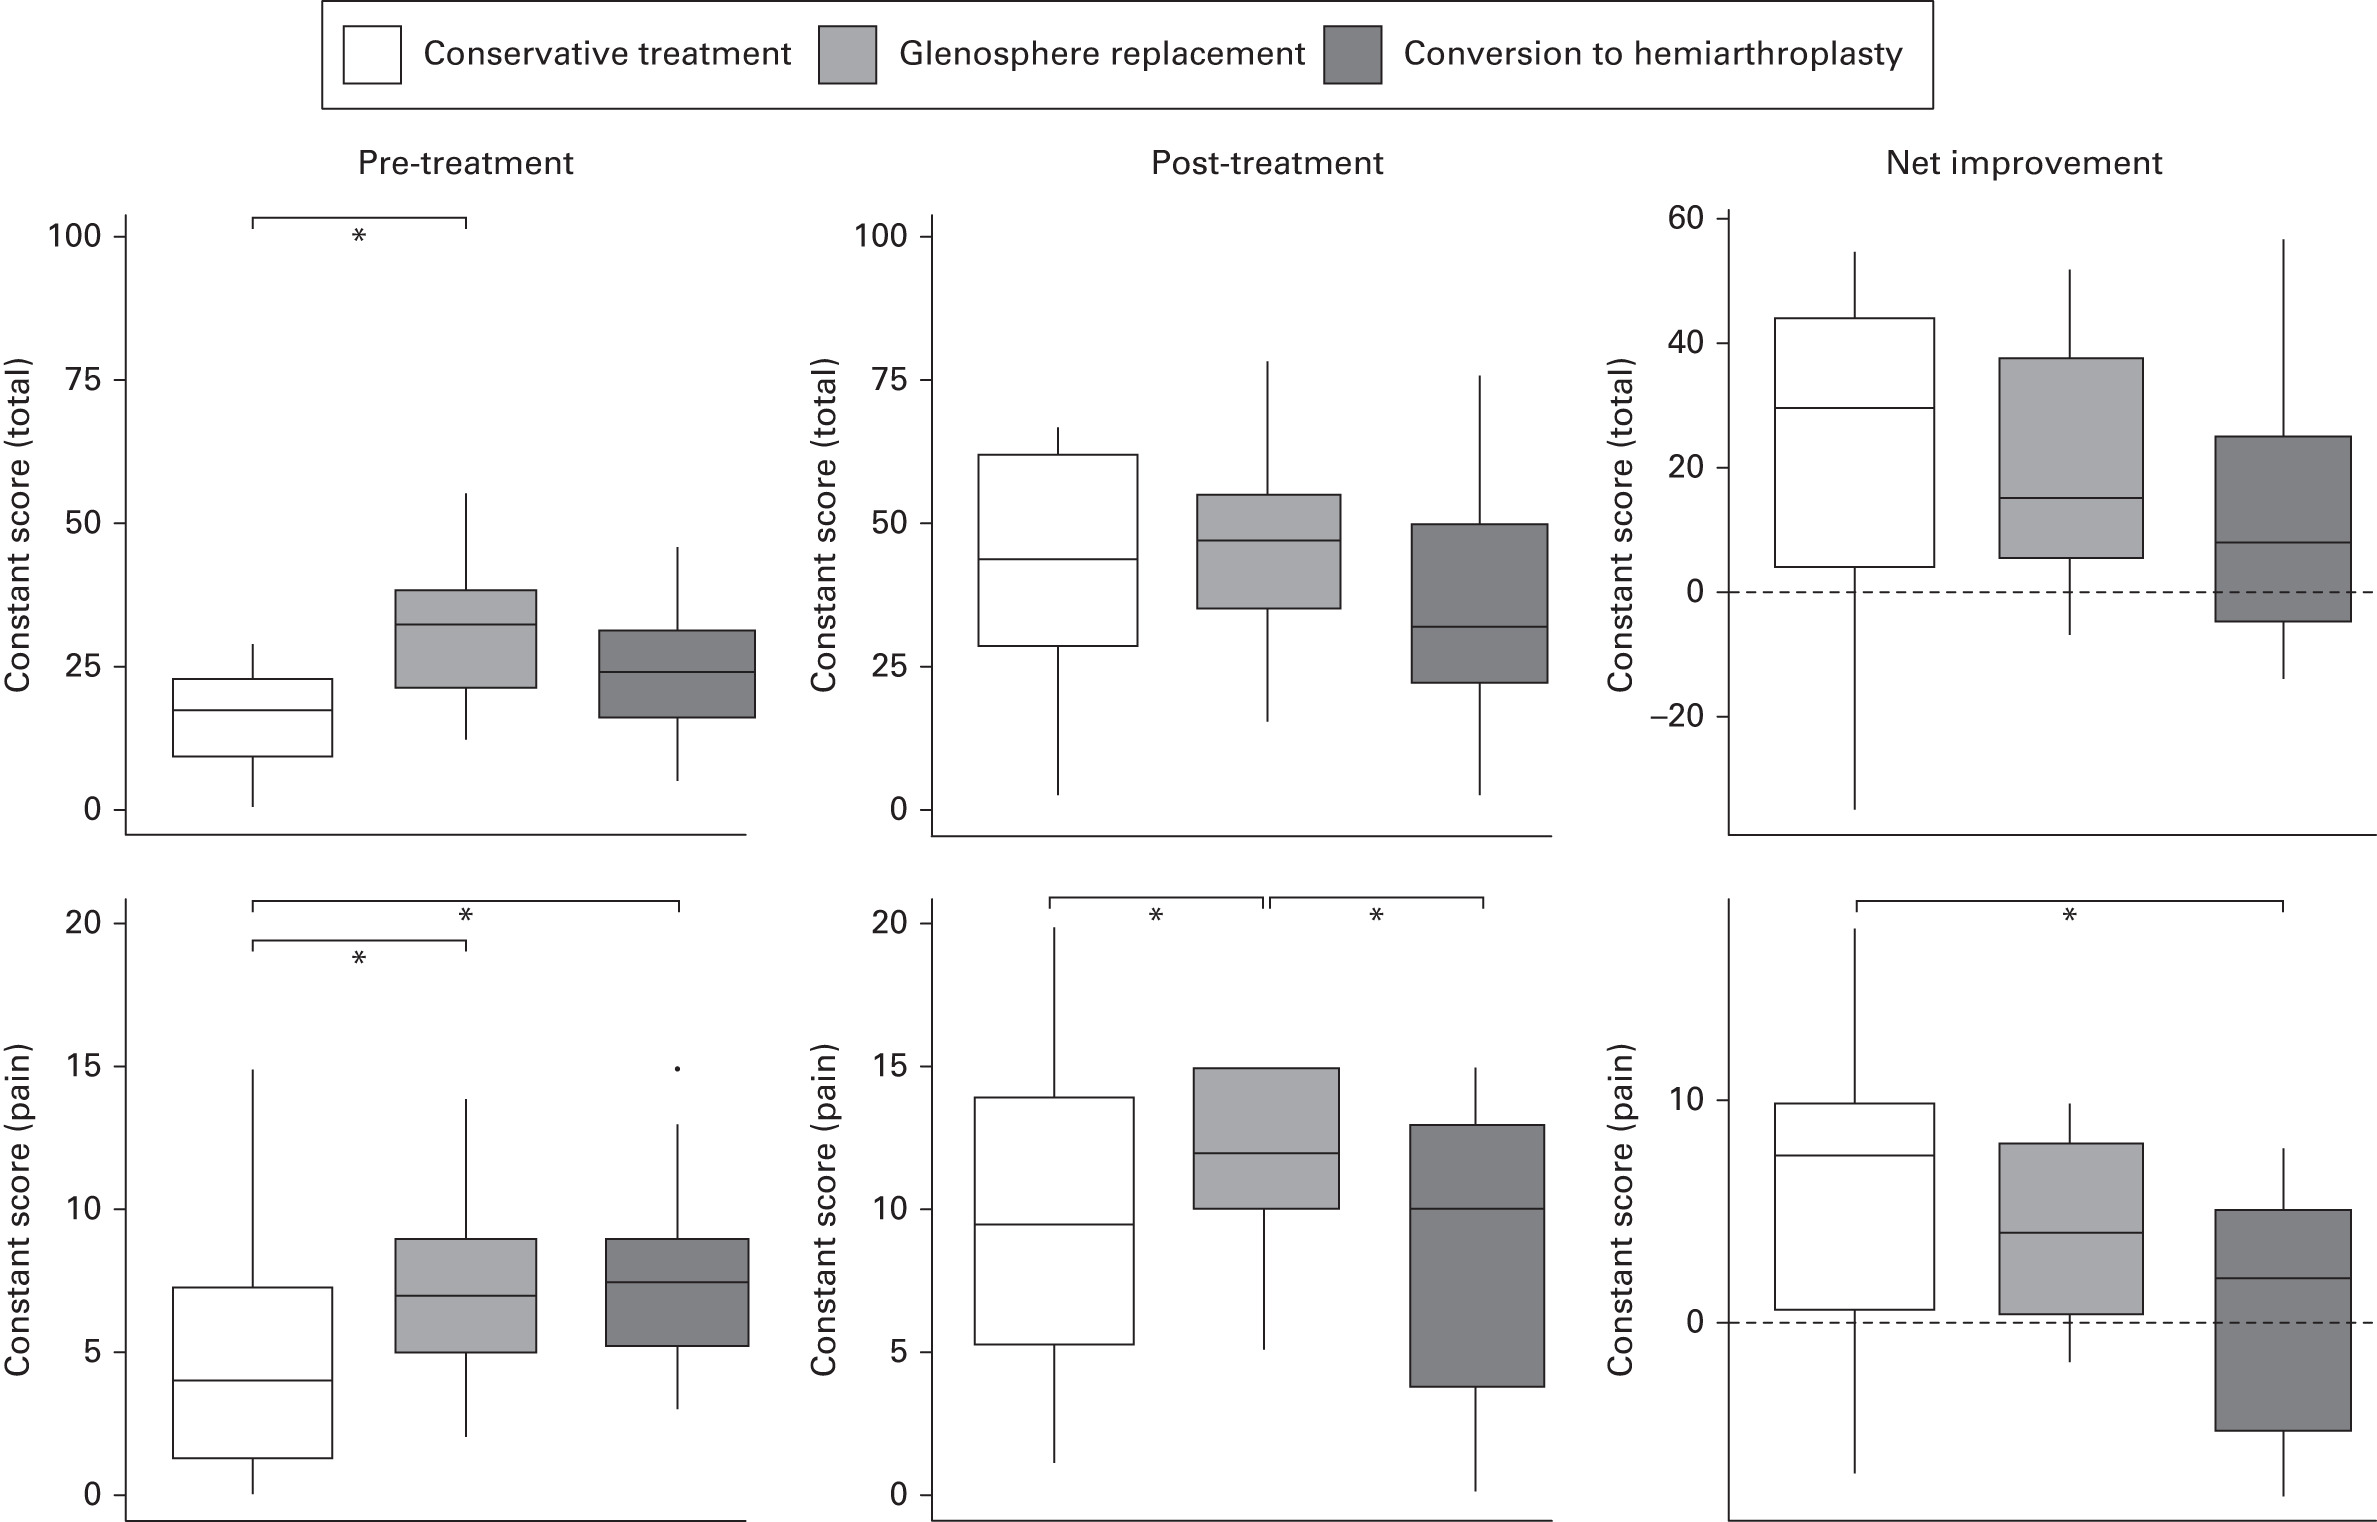 Fig. 5 
          Pre- and post-treatment Constant score (total and pain component) depending on glenoid loosening treatment (conservative vs glenosphere replacement vs conversion to hemiarthroplasty). The plots illustrate median values (horizontal black lines), interquartile ranges (boxes), 95% confidence intervals (whiskers), and outliers (dots). Asterisks (*) indicate where significant differences were found between groups.
        